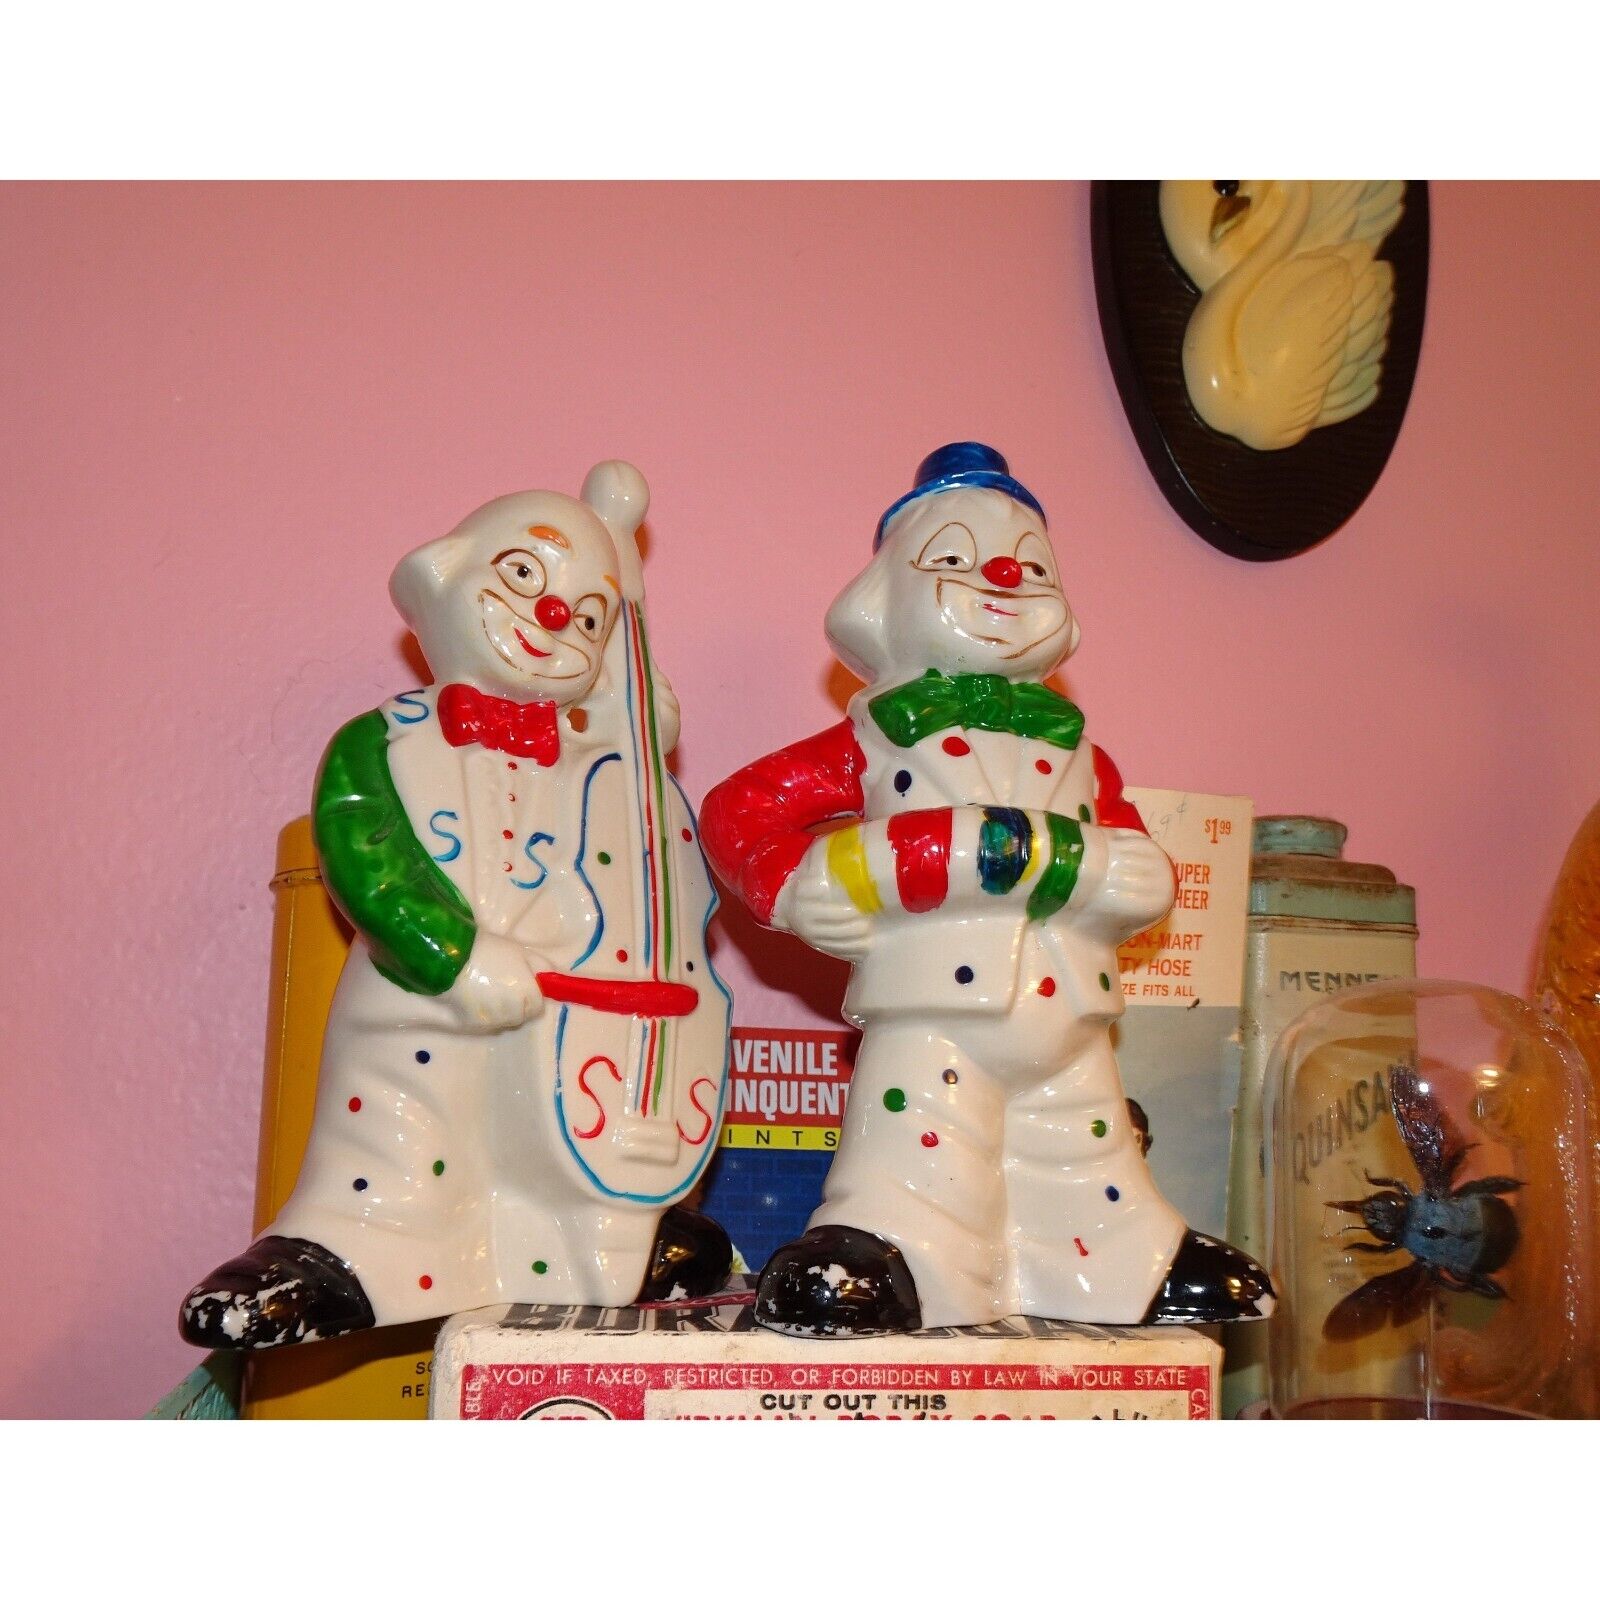 Vintage Two Ceramic Clowns Playing Instruments cello accordion oddity creepy